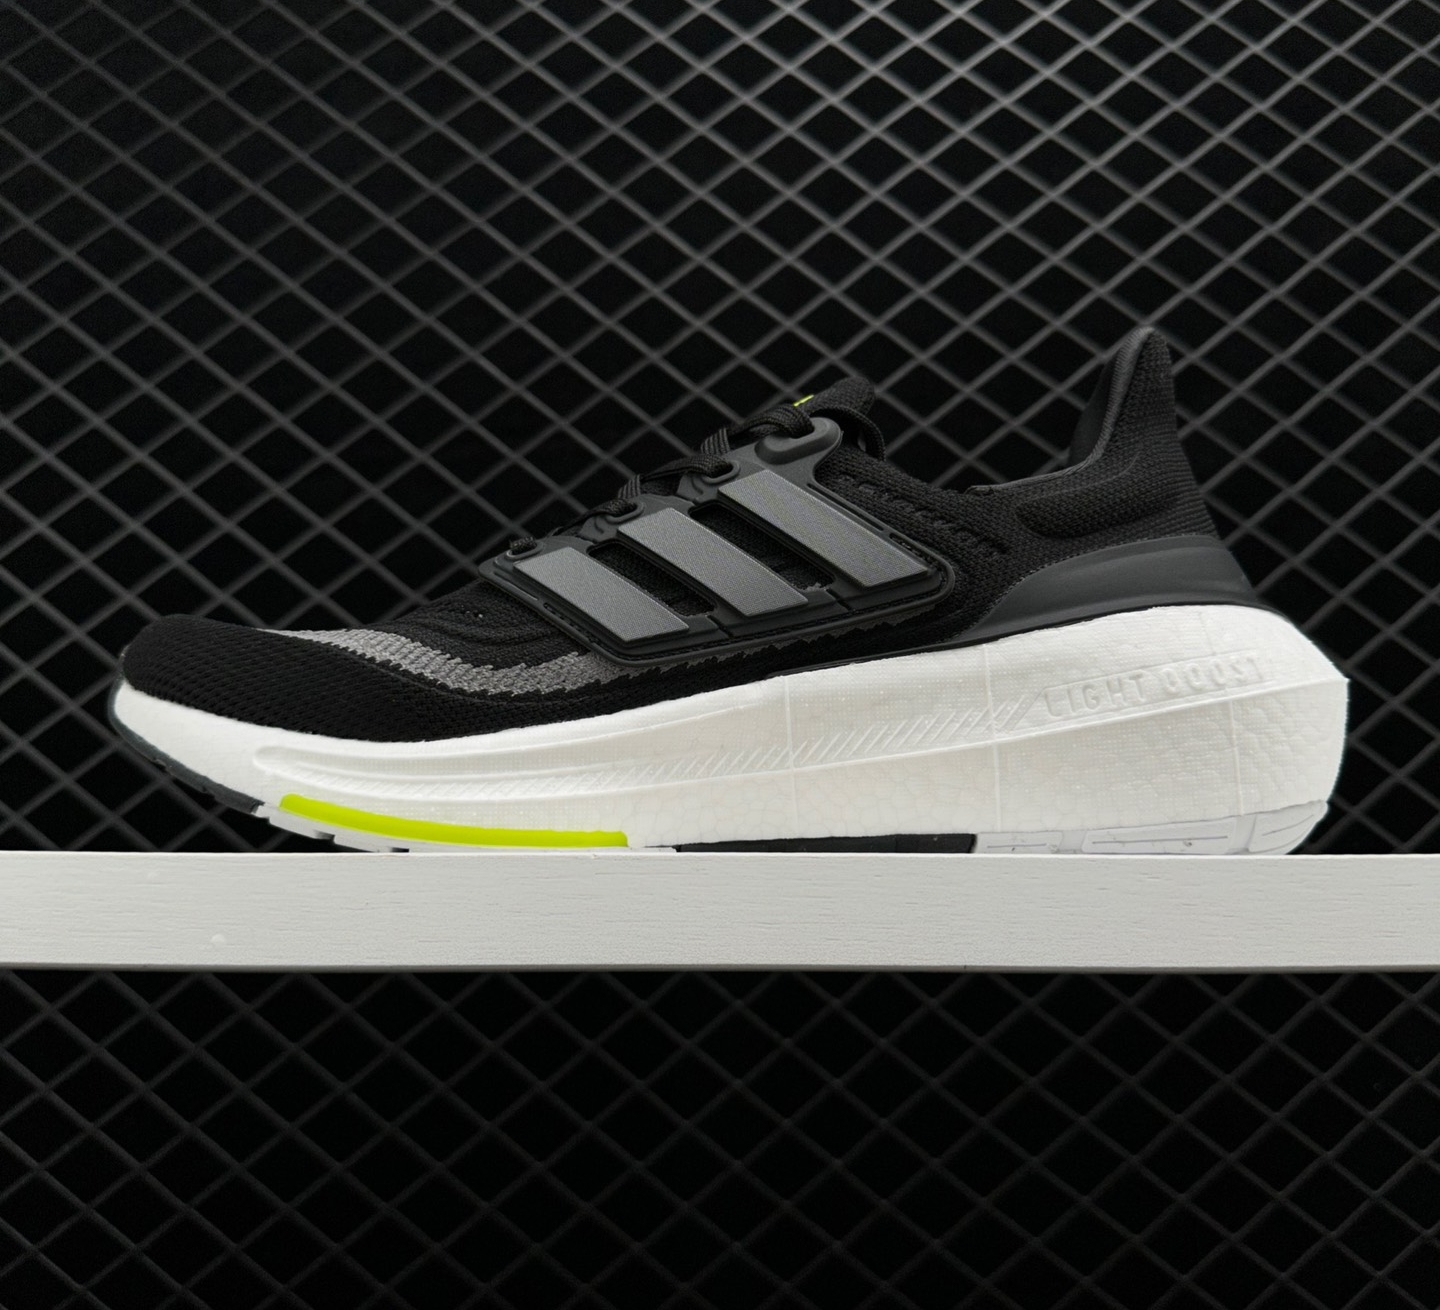 Adidas UltraBoost Light 'Core Black' - Stylish and Comfortable Footwear | Order Now!